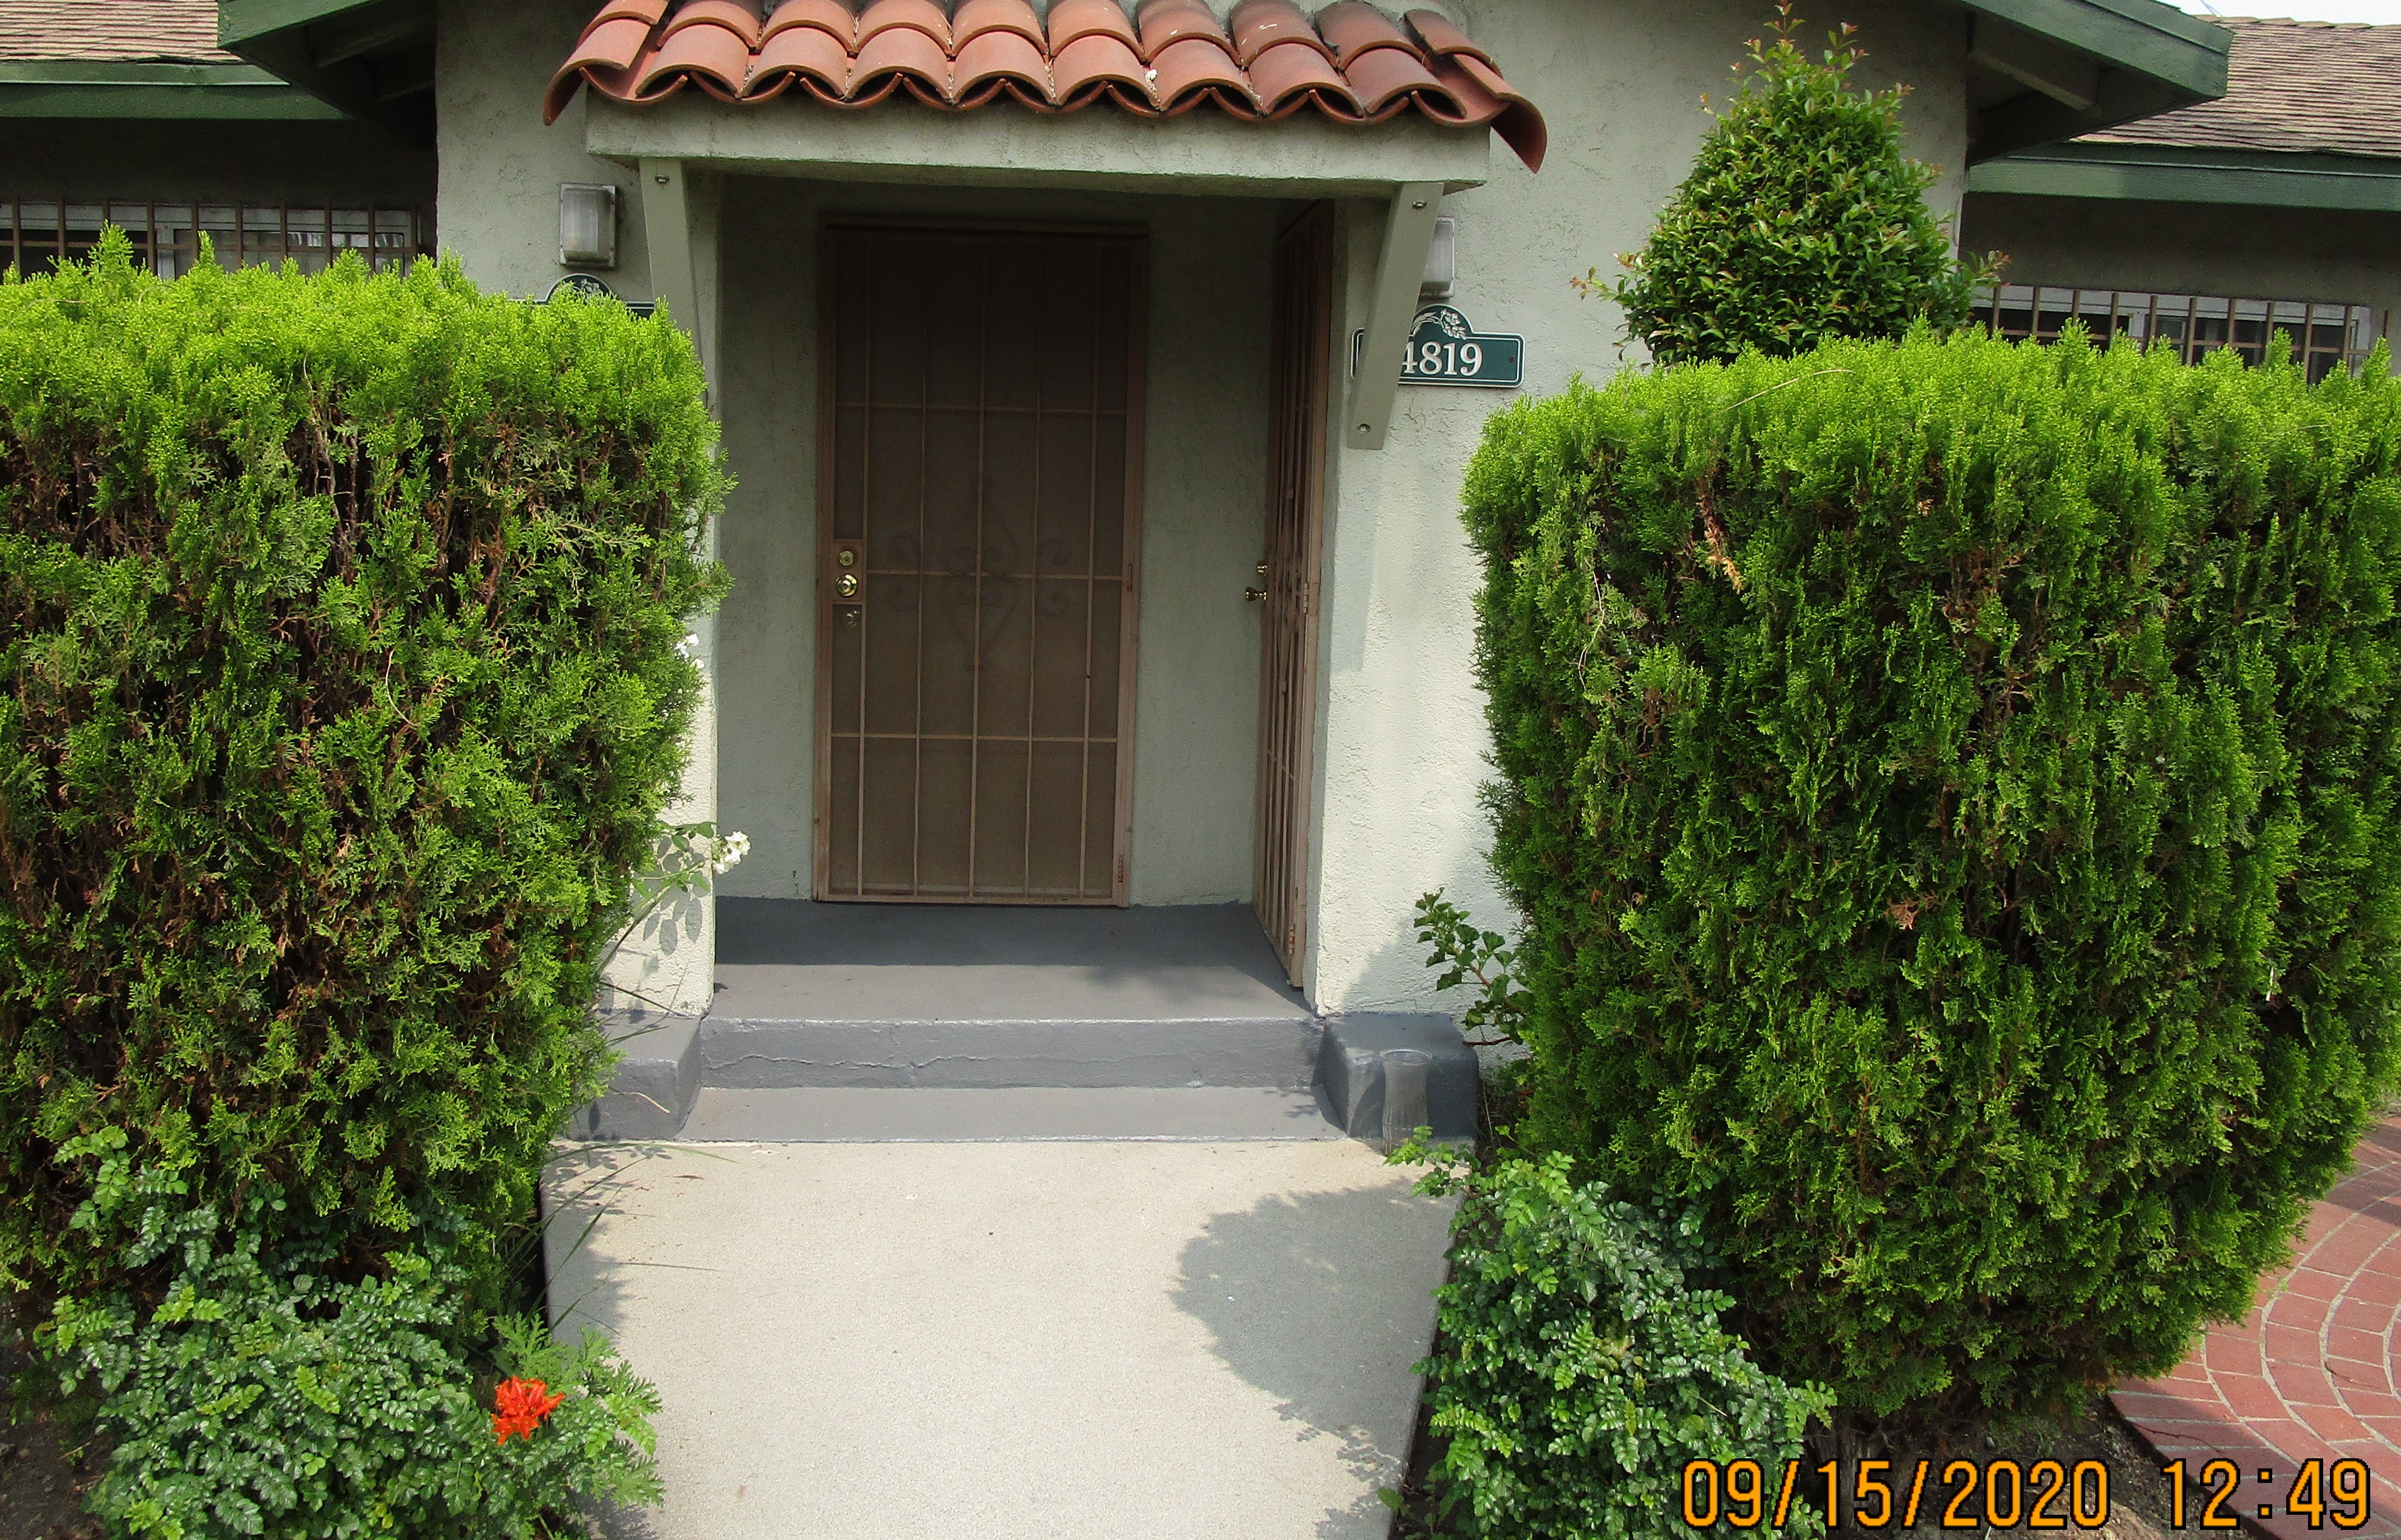 Front view of main entrance, one step, another door on the right side, house number on the right side, big tall bushes on each side.